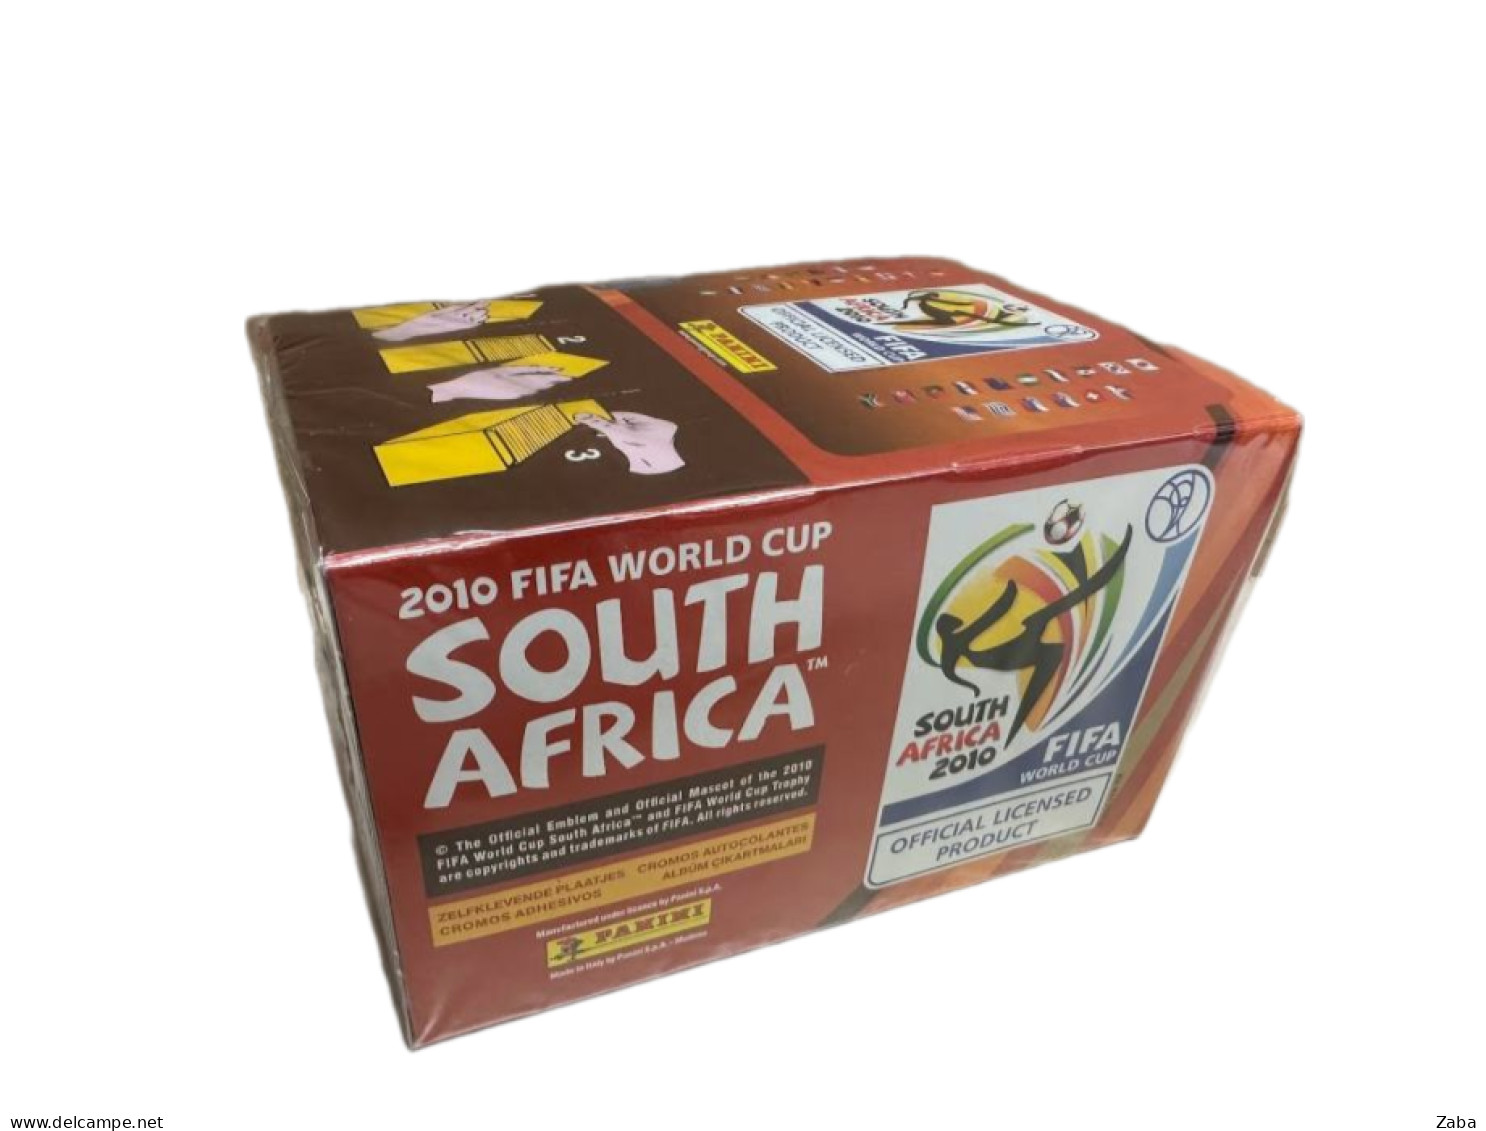 Panini WC South Africa 2010 Box Of 100 Packets, Factory Packed - Italian Edition